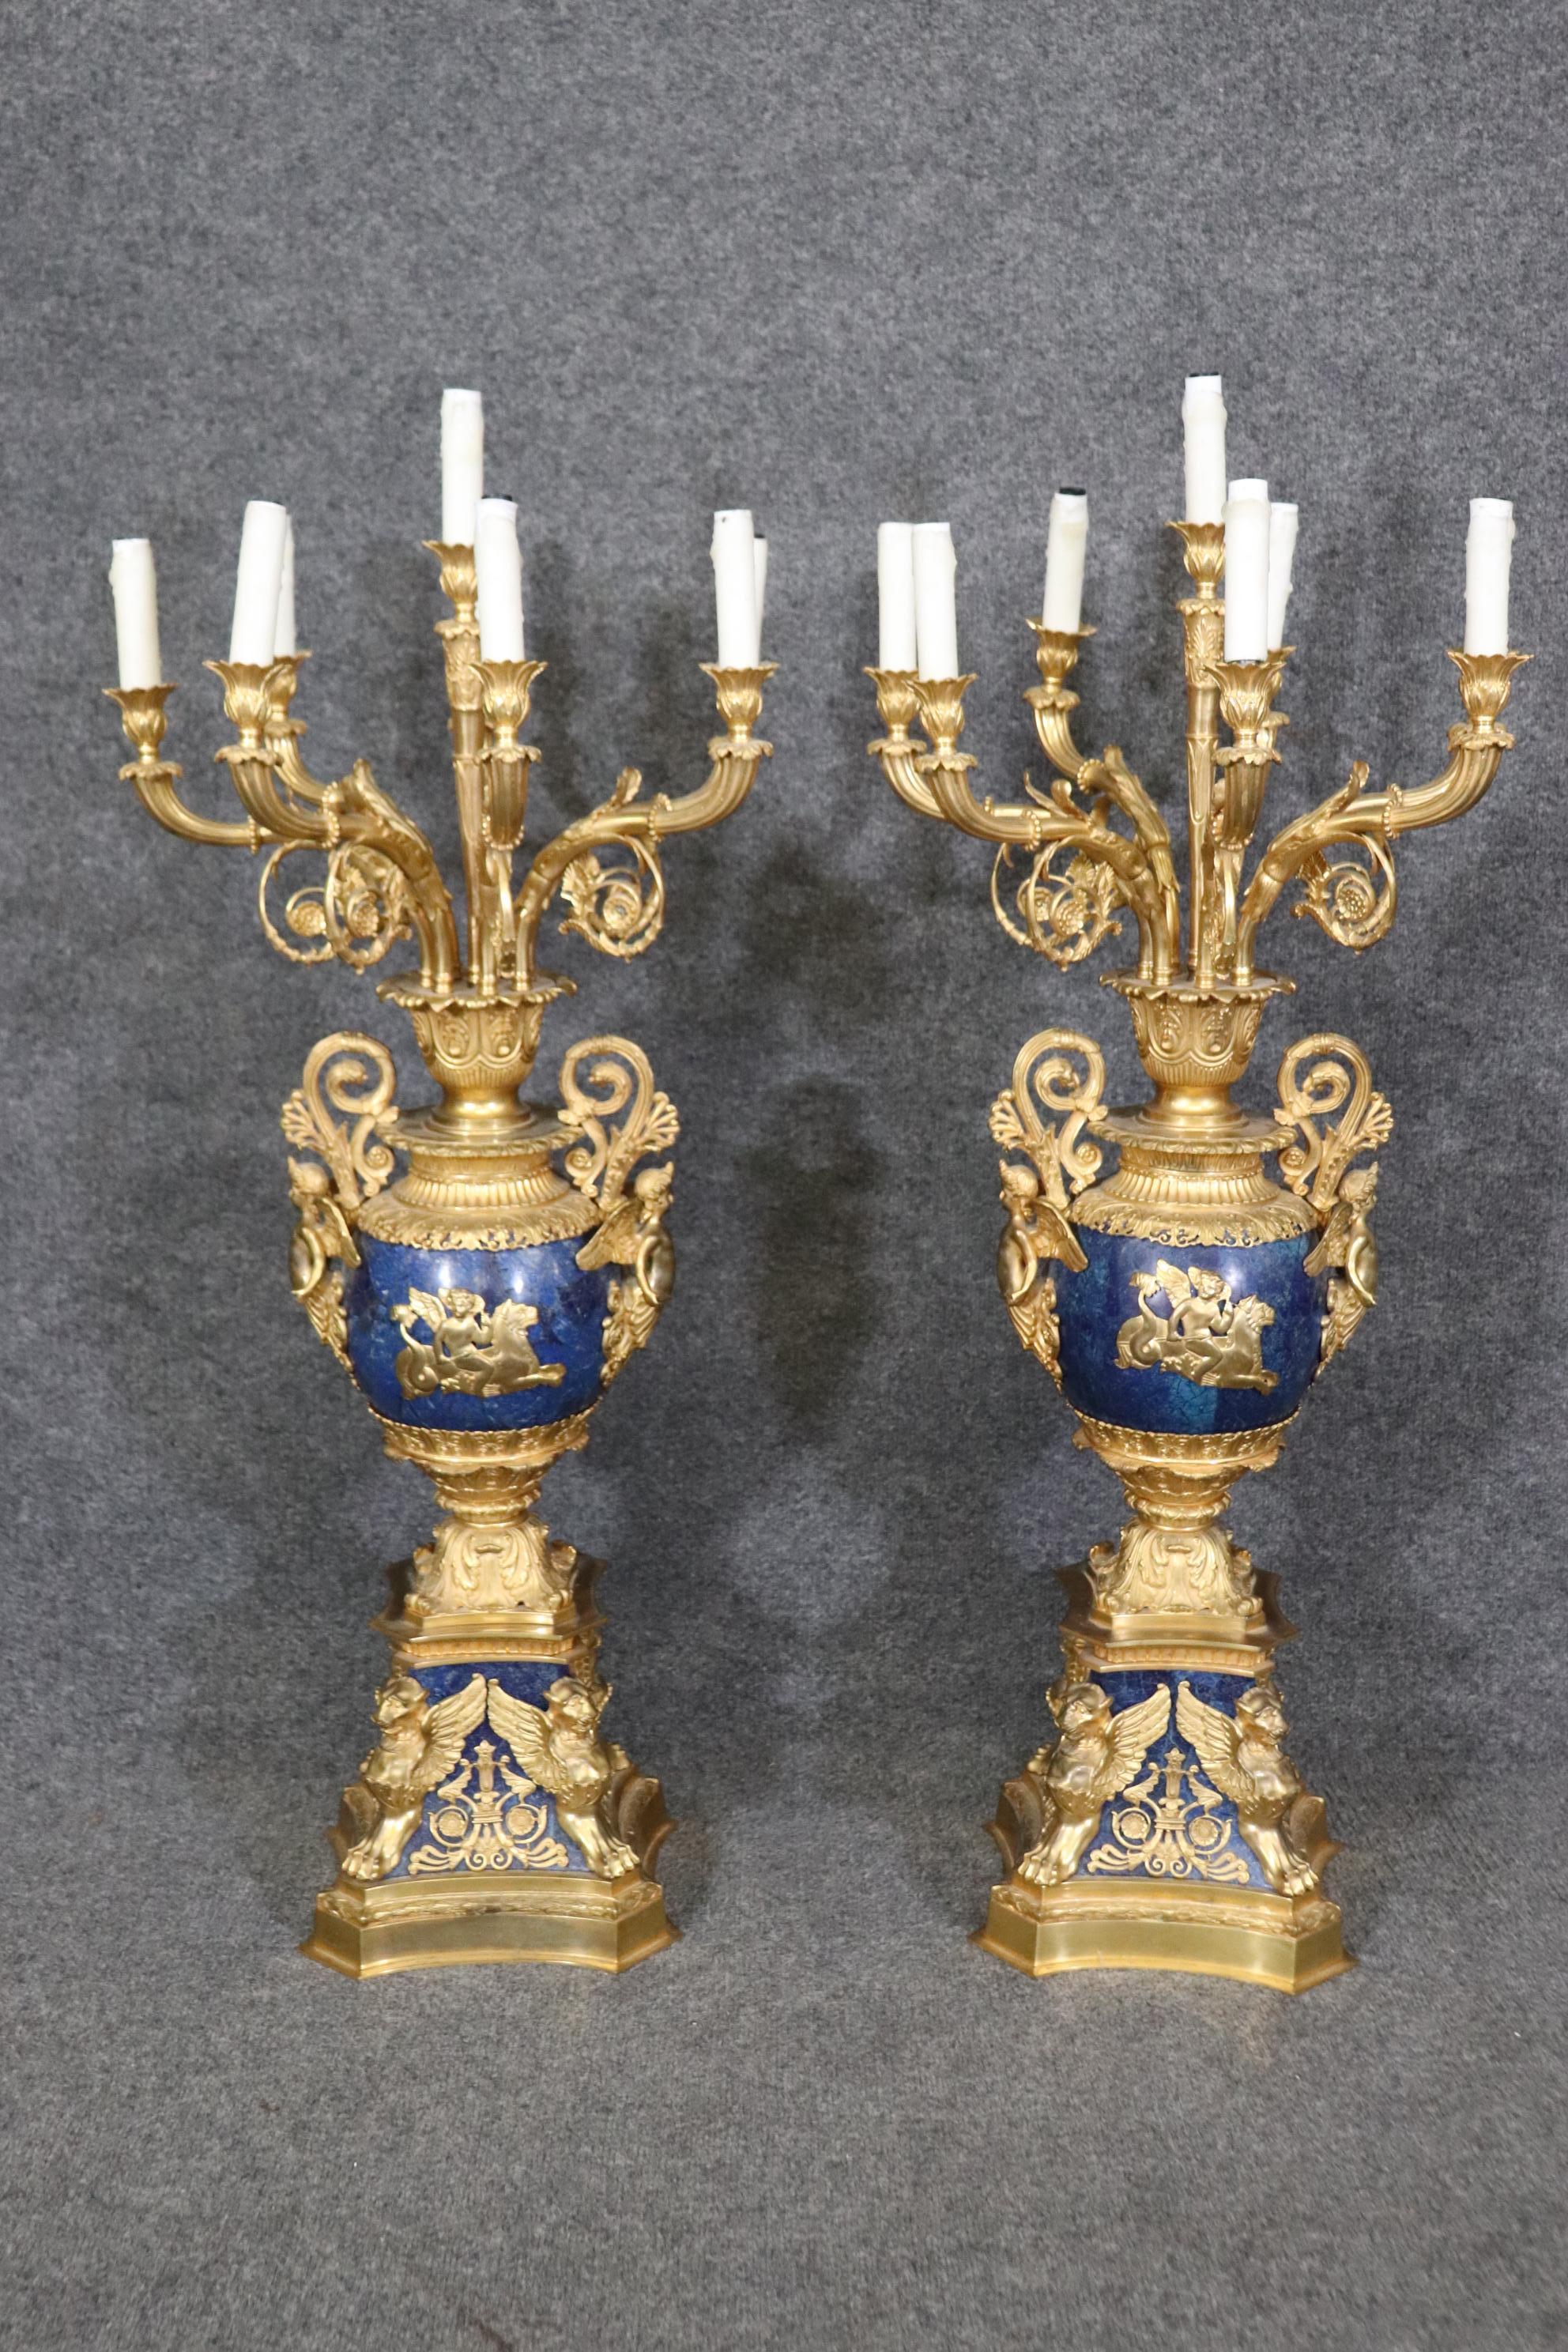 Late 19th Century French Belle Epoque Dore' Bronze and Lapis Lazuli Candelabra For Sale 7